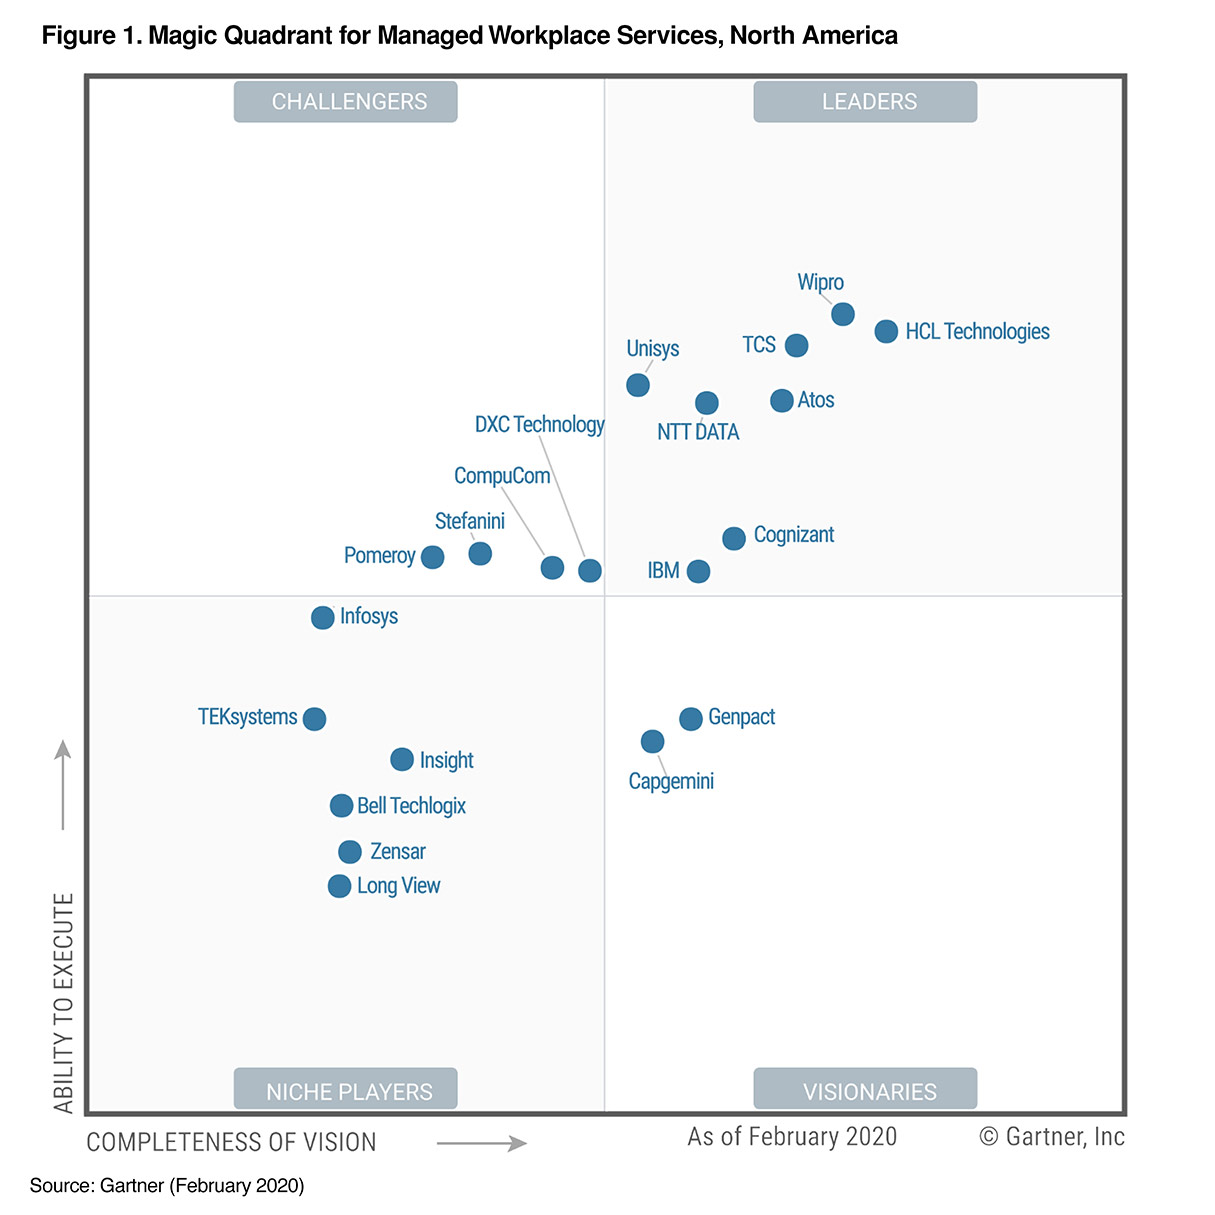 Wipro positioned as a Leader in 2020 Magic Quadrant for Managed Workplace Services, North America